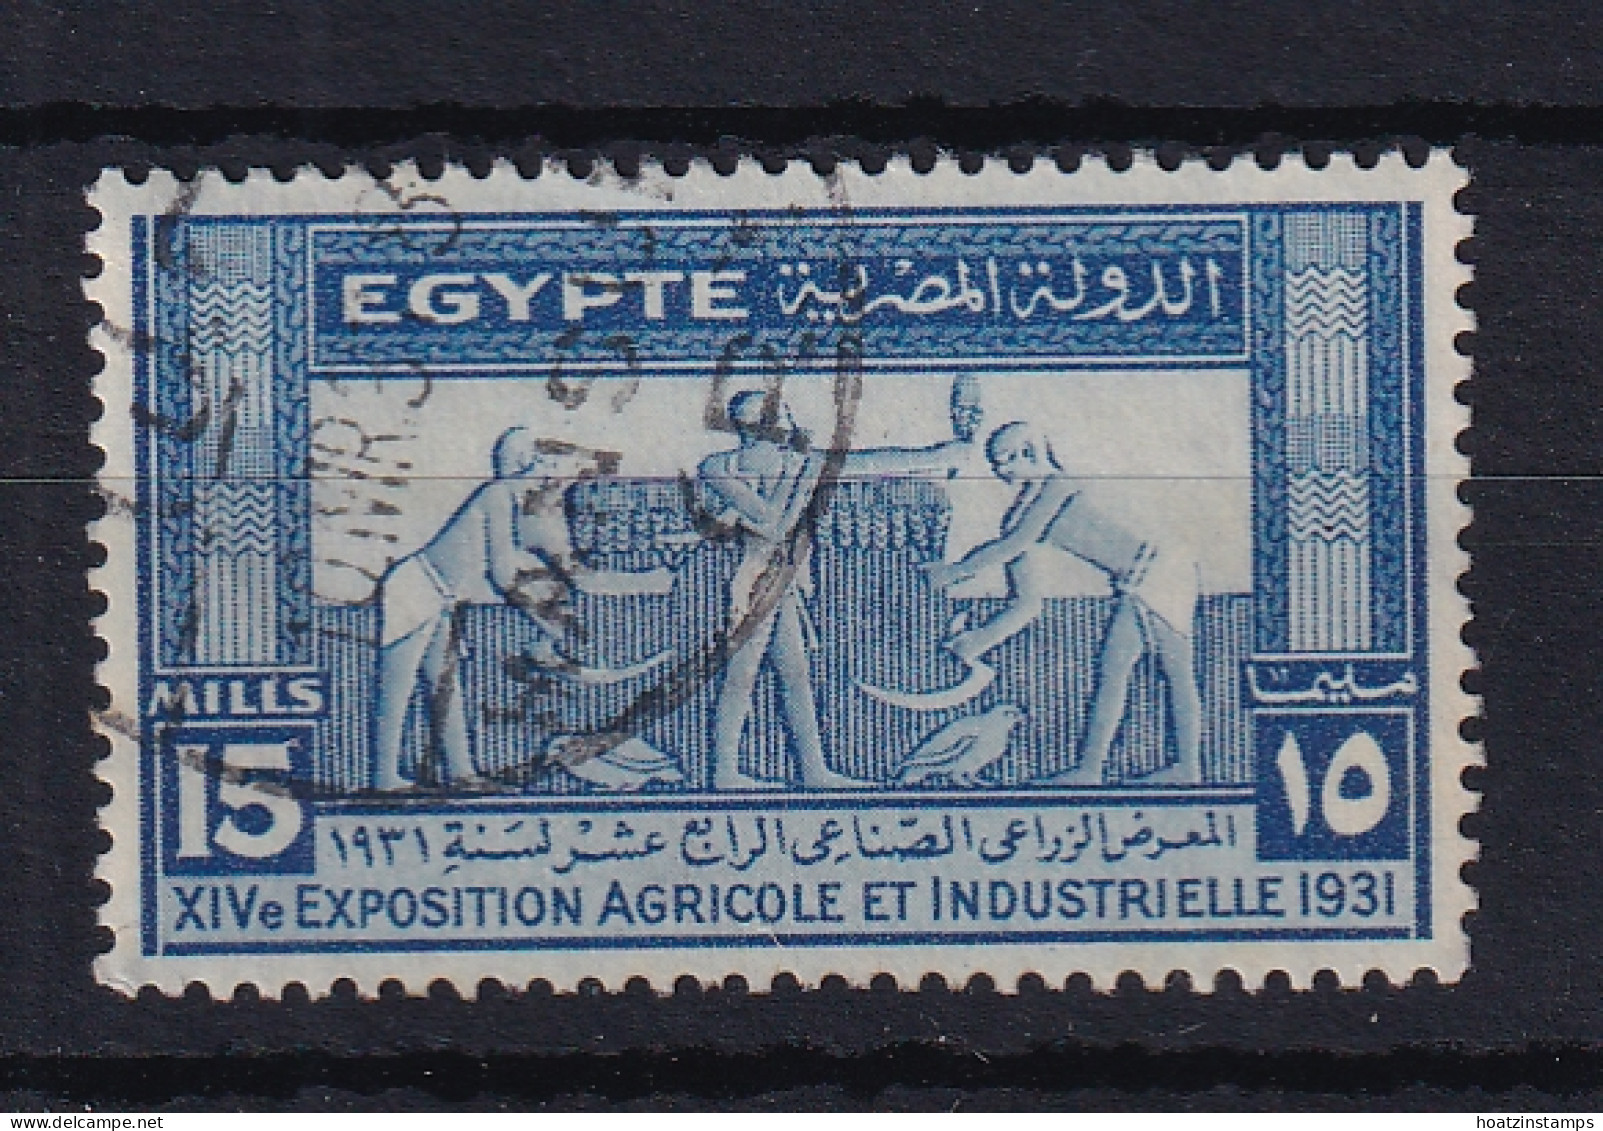 Egypt: 1931   Agricultural And Industrial Exhibition   SG184   15m    Used - Gebruikt